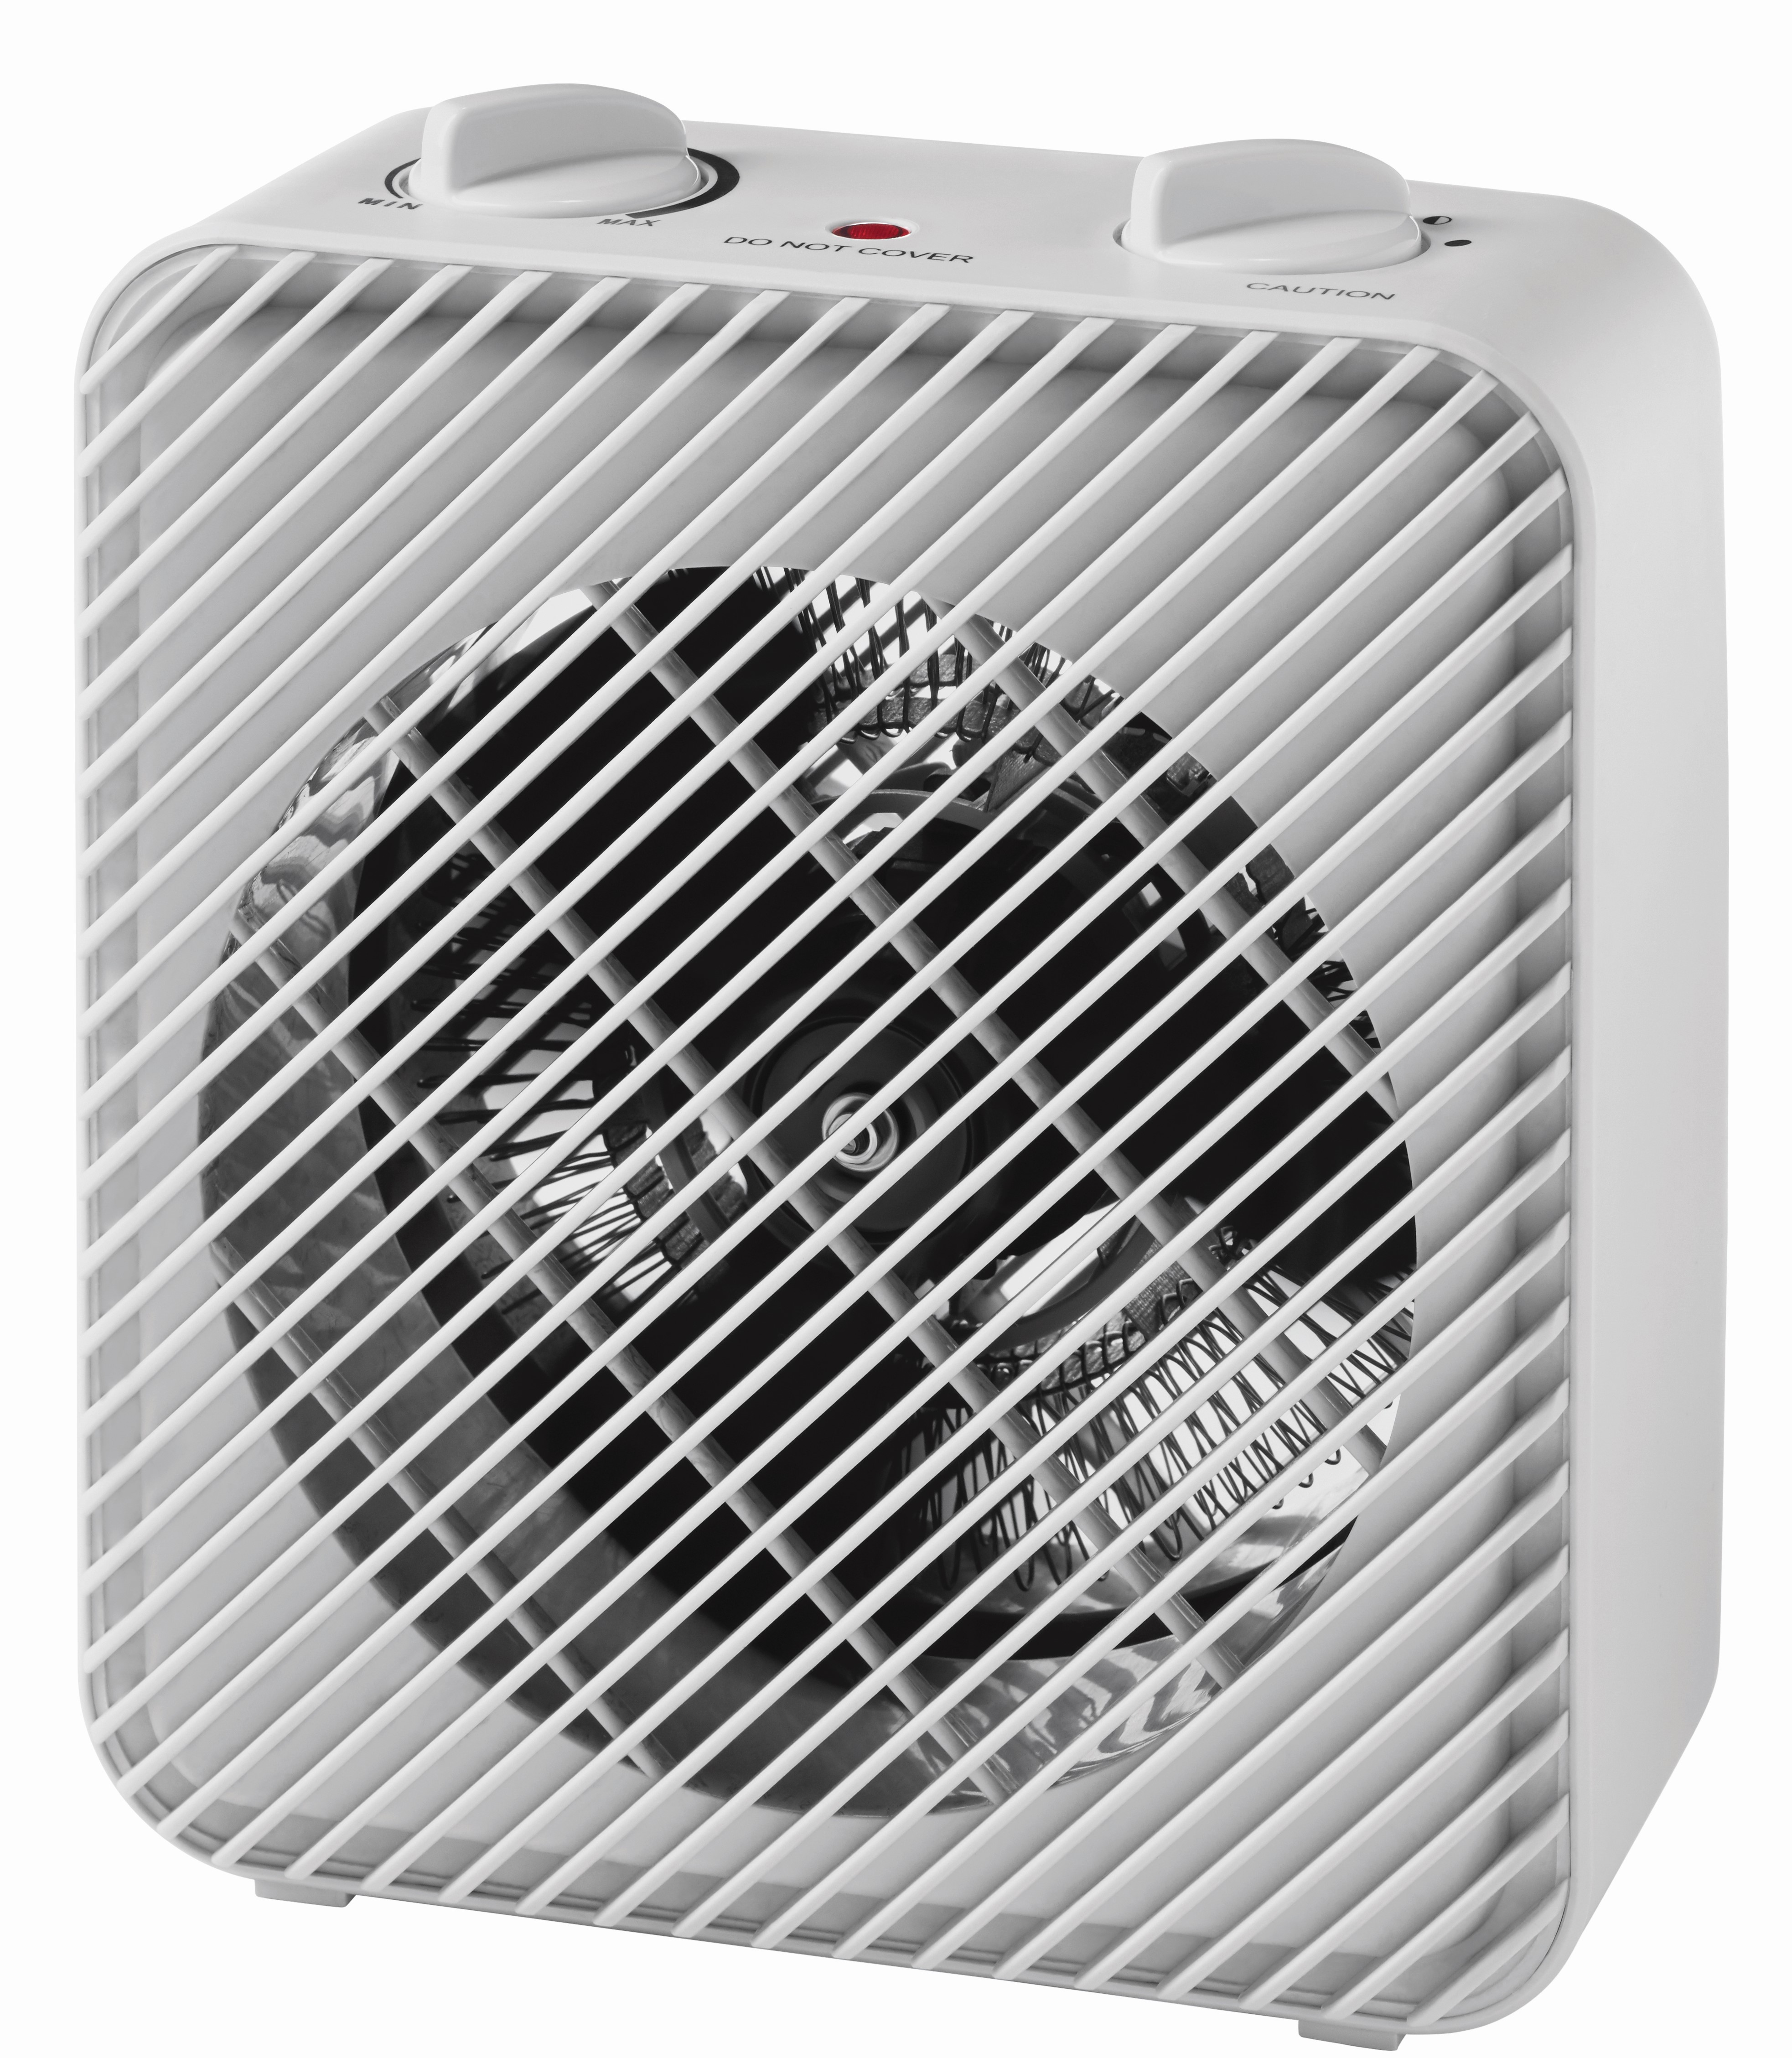 Mainstays 1500W 3-Speed Electric Fan-Forced Space Heater with Adjustable Thermostat, White - image 1 of 9